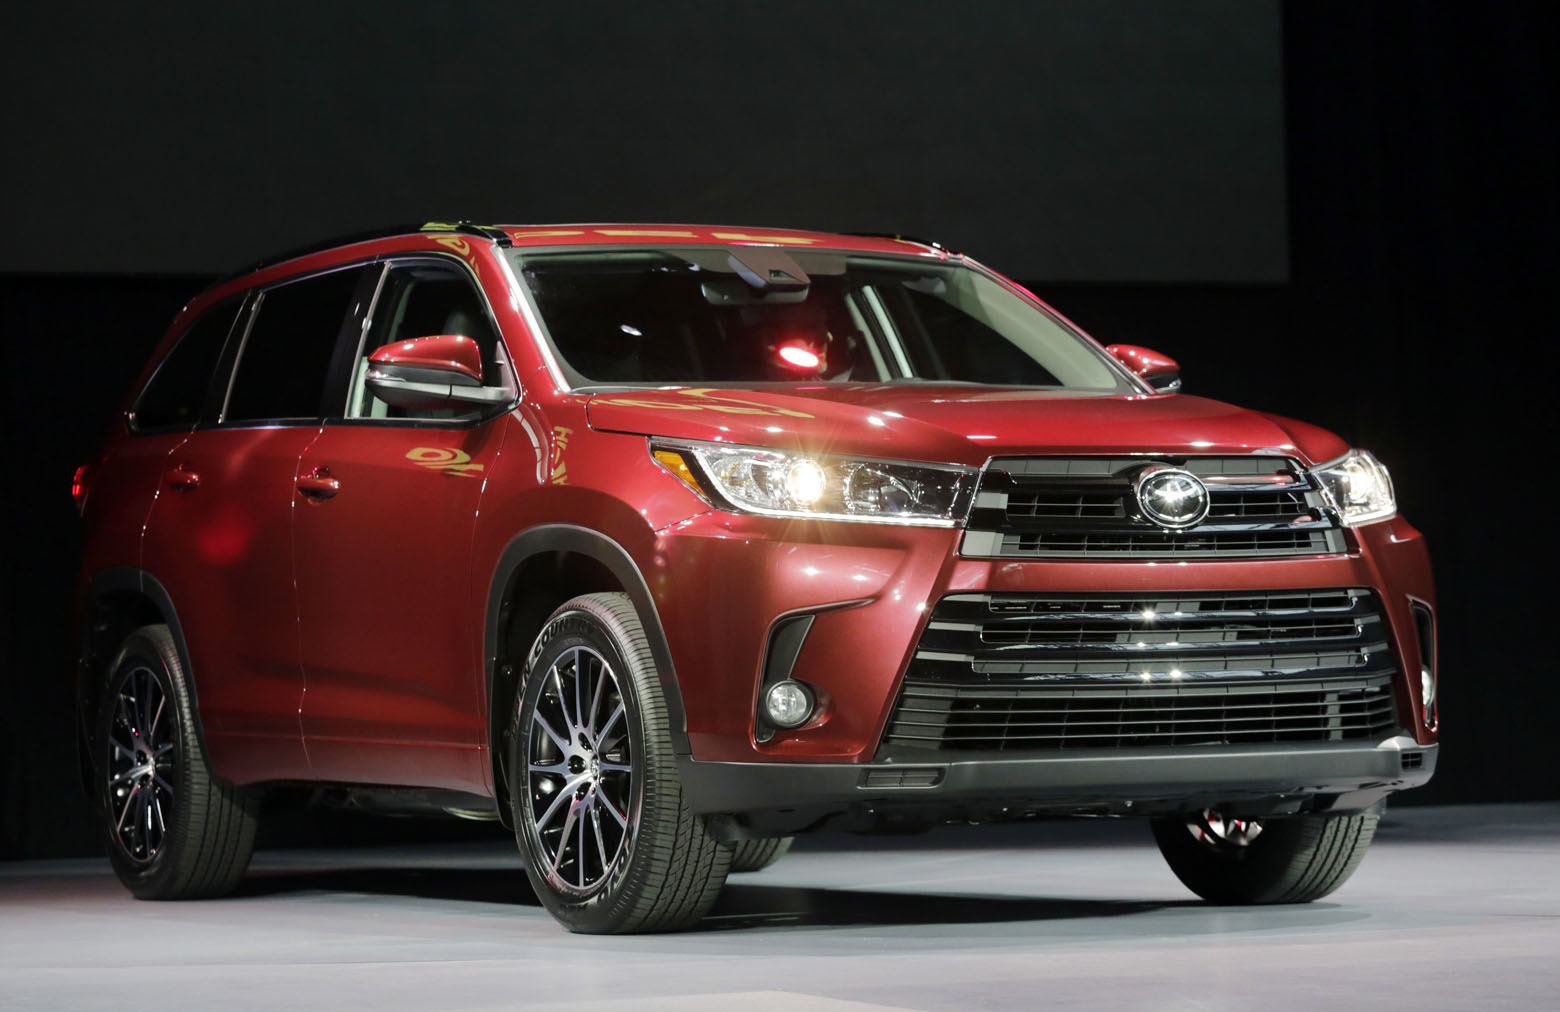 FILE - This Wednesday, March 23, 2016, file photo shows the 2017 Toyota Highlander Hybrid at the New York International Auto Show, in New York. The Toyota Highlander is the top midsize SUV in Consumer Reportsâ€&#x2122; annual rankings, released Tuesday, Feb. 28, 2017. (AP Photo/Mark Lennihan, File)